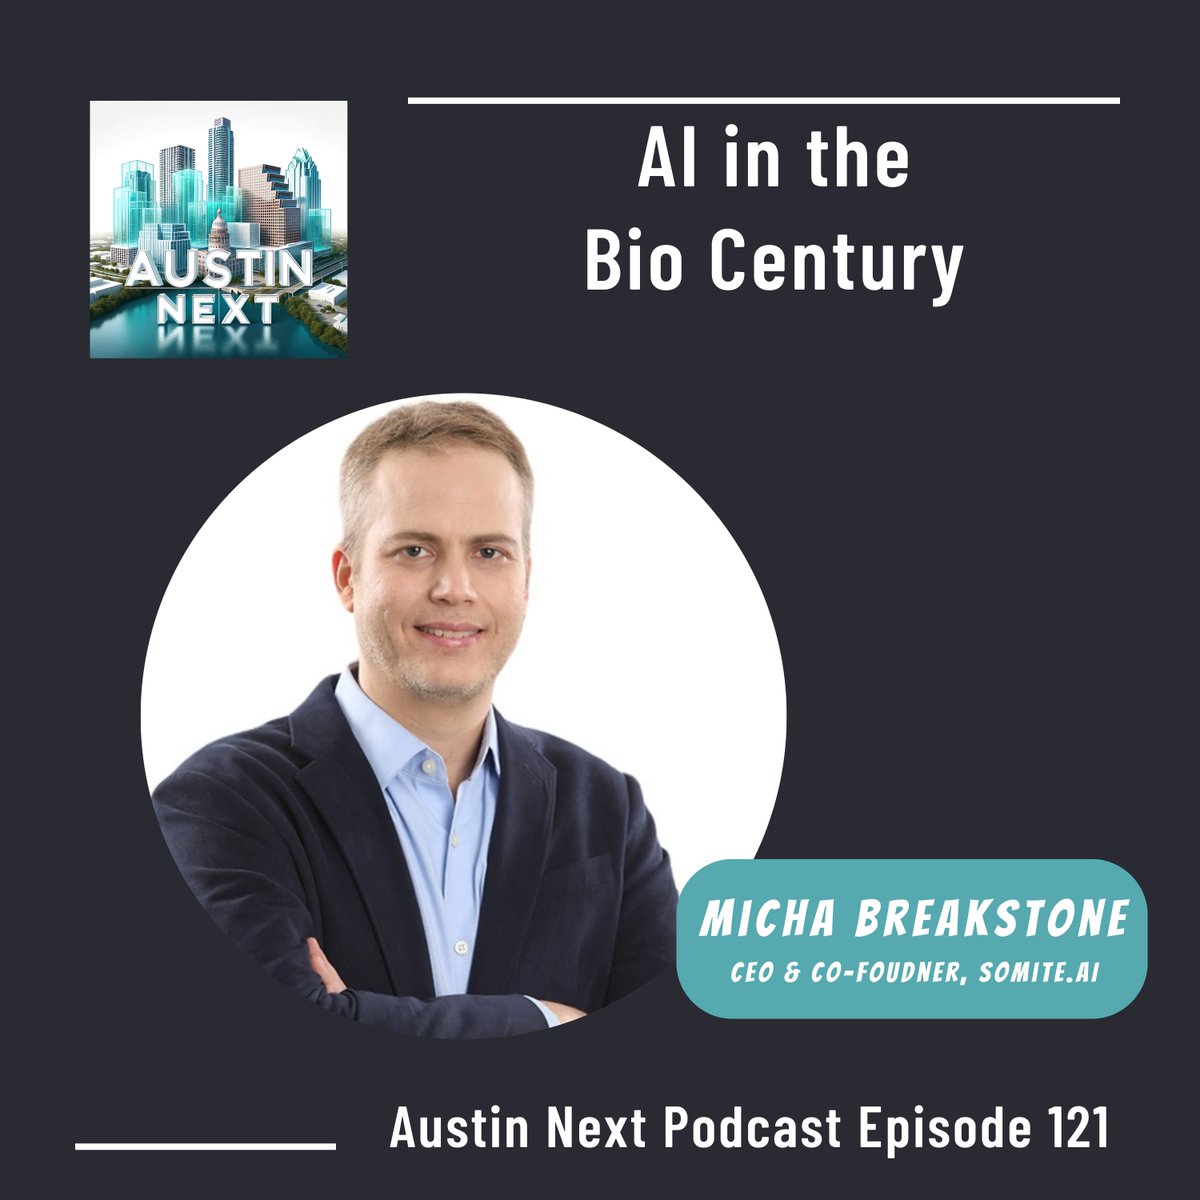 📌You can find the full episode with @MichaBreakstone of @SomiteAi at the links below & on all major podcast platforms.

Spotify: open.spotify.com/episode/3B39RZ…

Apple: podcasts.apple.com/us/podcast/ai-…

Austin Next Website: austinnextpodcast.com/ai-in-the-bio-…